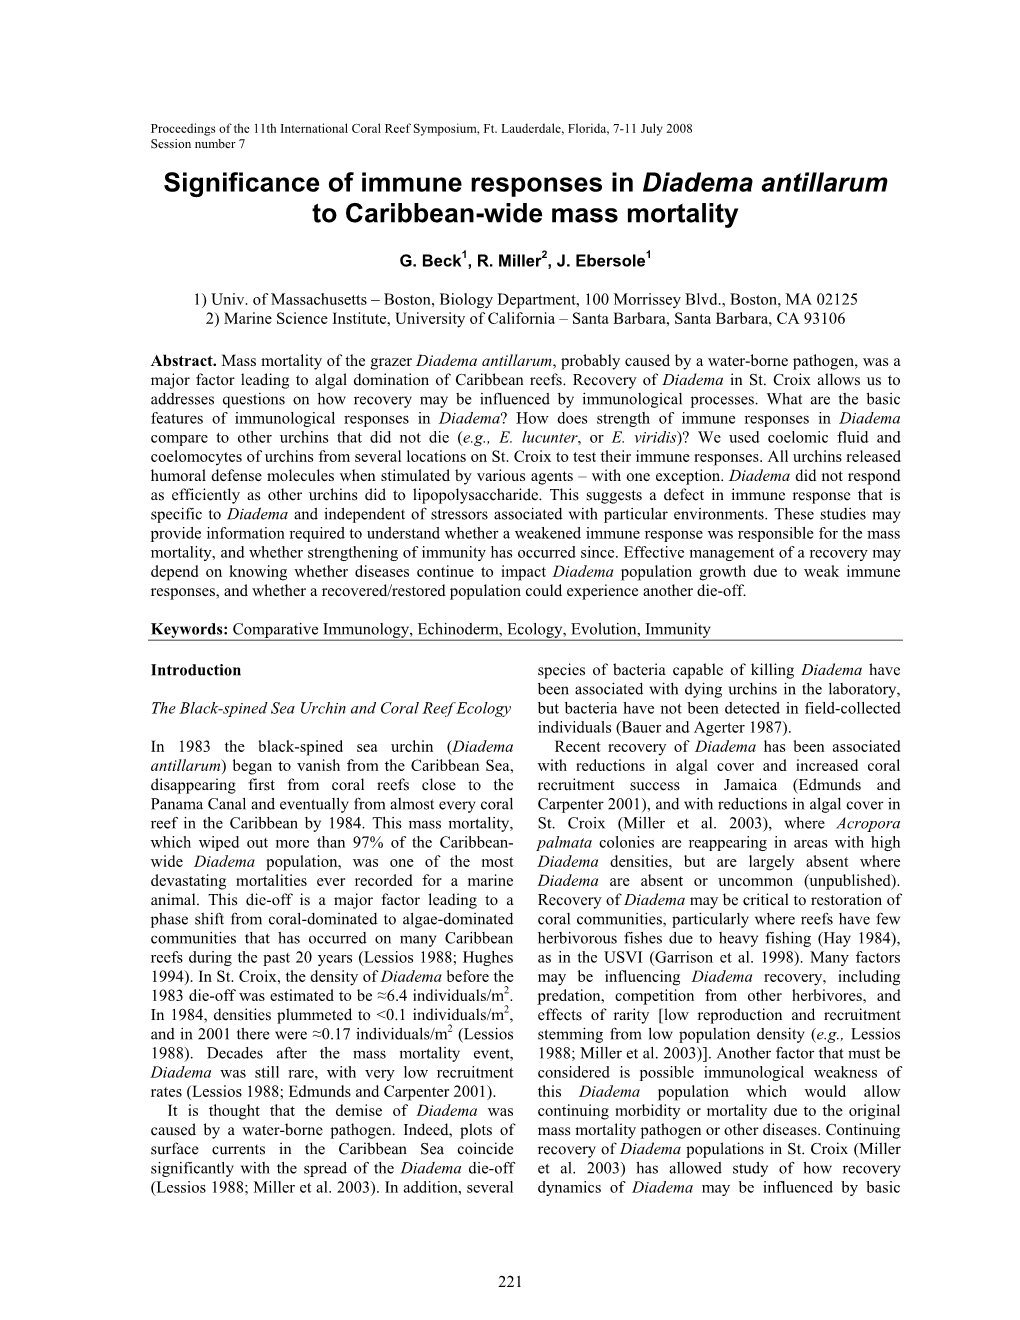 Significance of Immune Responses in Diadema Antillarum to Caribbean-Wide Mass Mortality